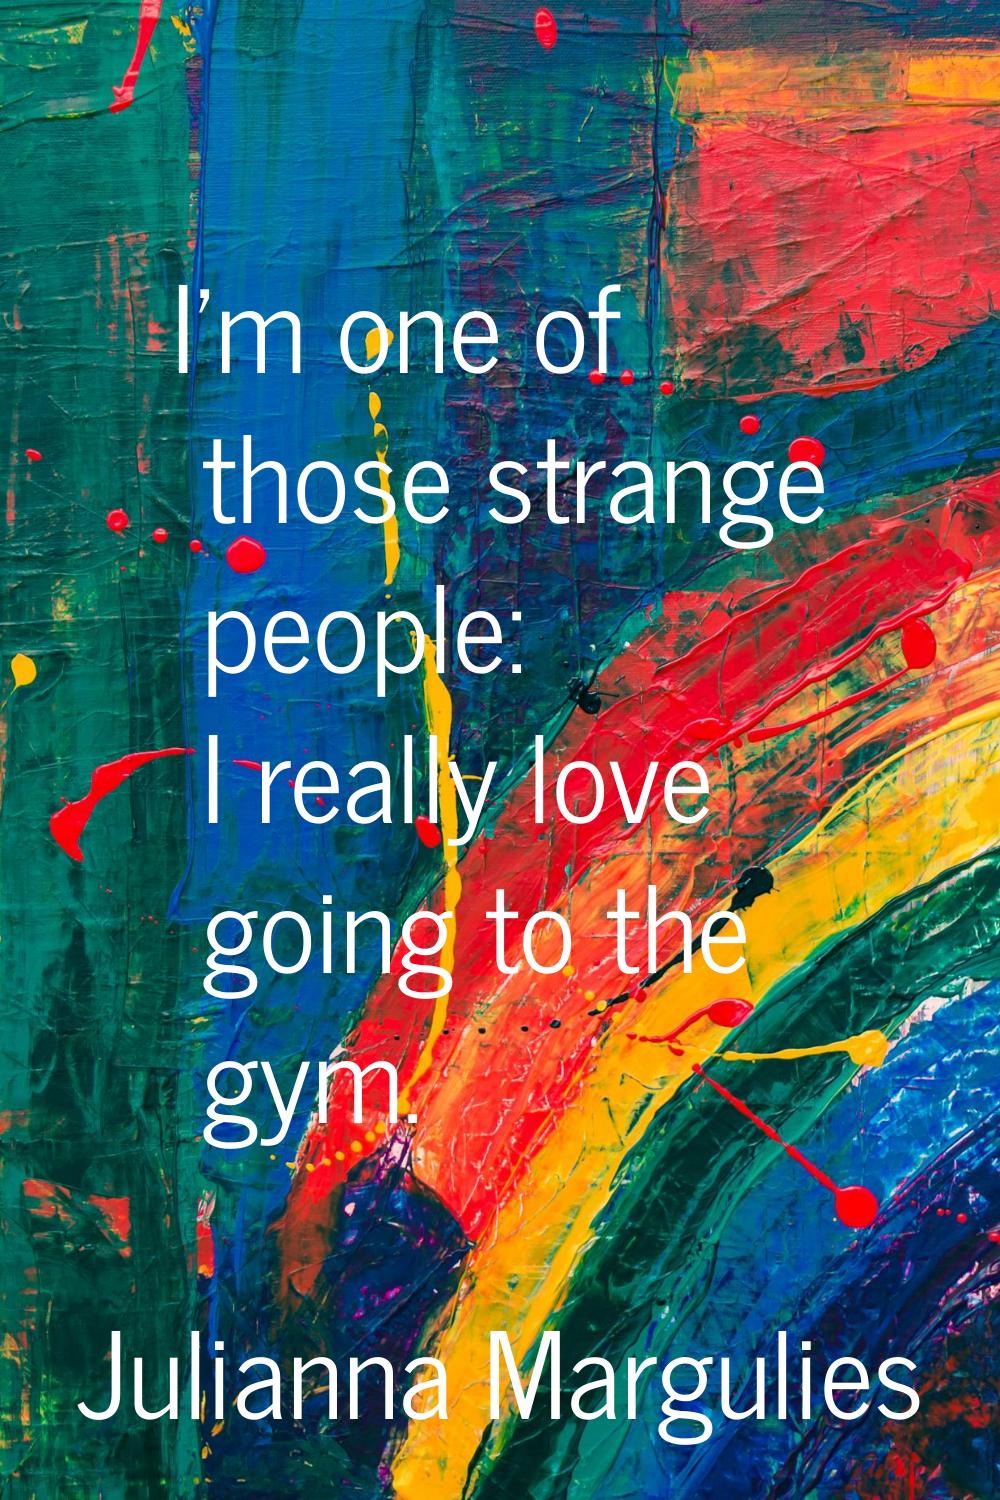 I'm one of those strange people: I really love going to the gym.